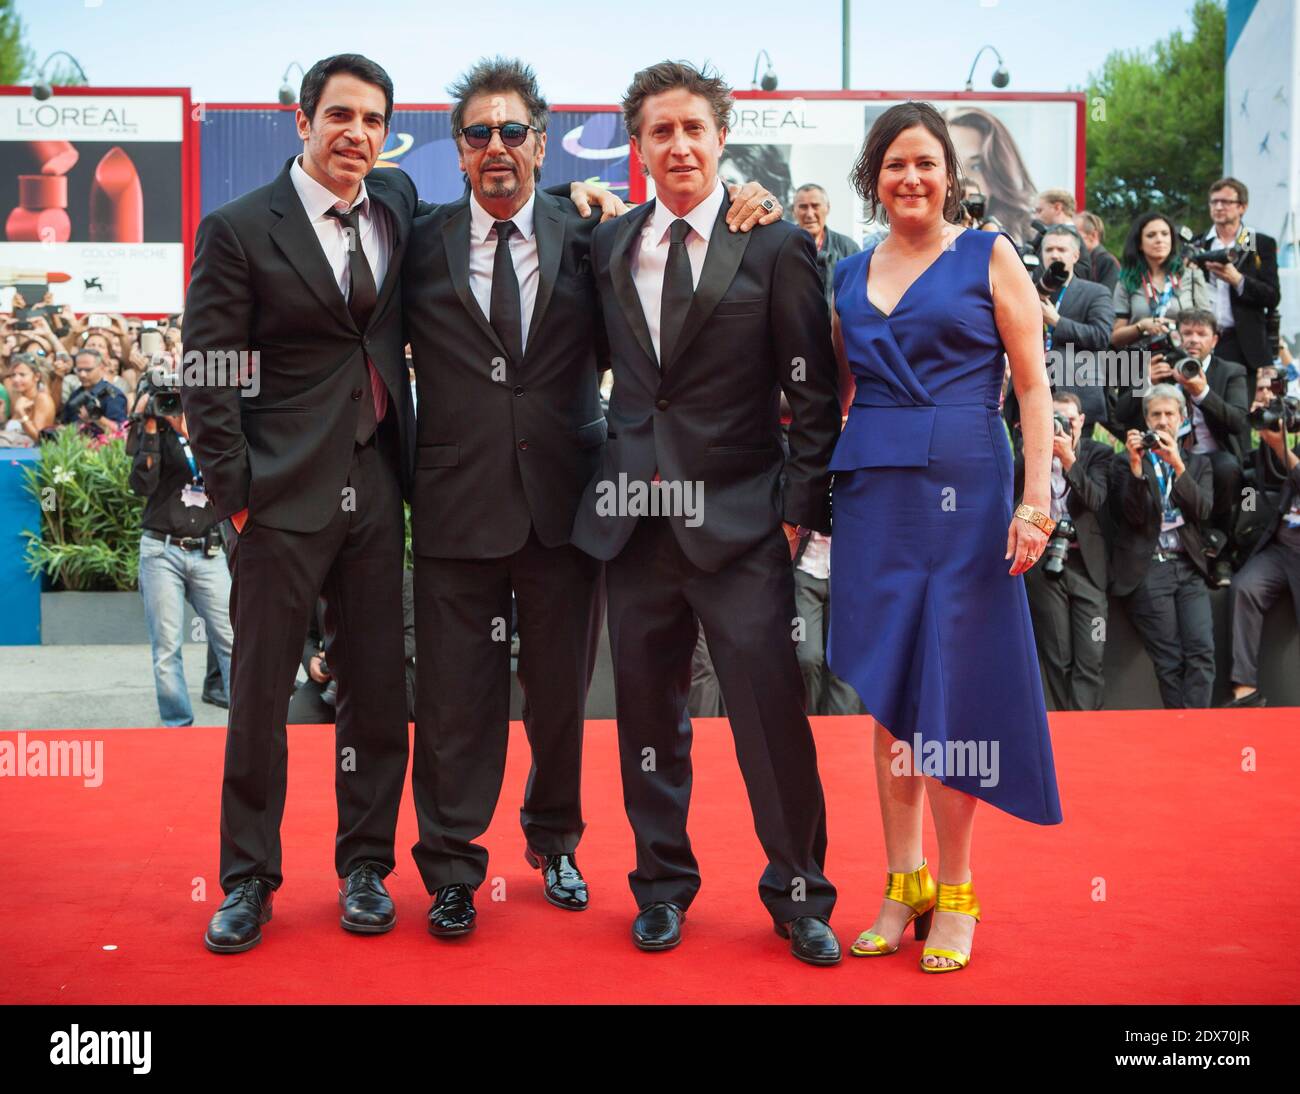 US actors Chris Messina, Al Pacino and the filmaker David Gordon Green, Lisa Muskat attending the premiere for the film Manglehorn during the 71st Venice Film Festival, Venice, Italy, August 30, 2014. Photo by Marco Piovanotto/ABACAPRESS.COM Stock Photo